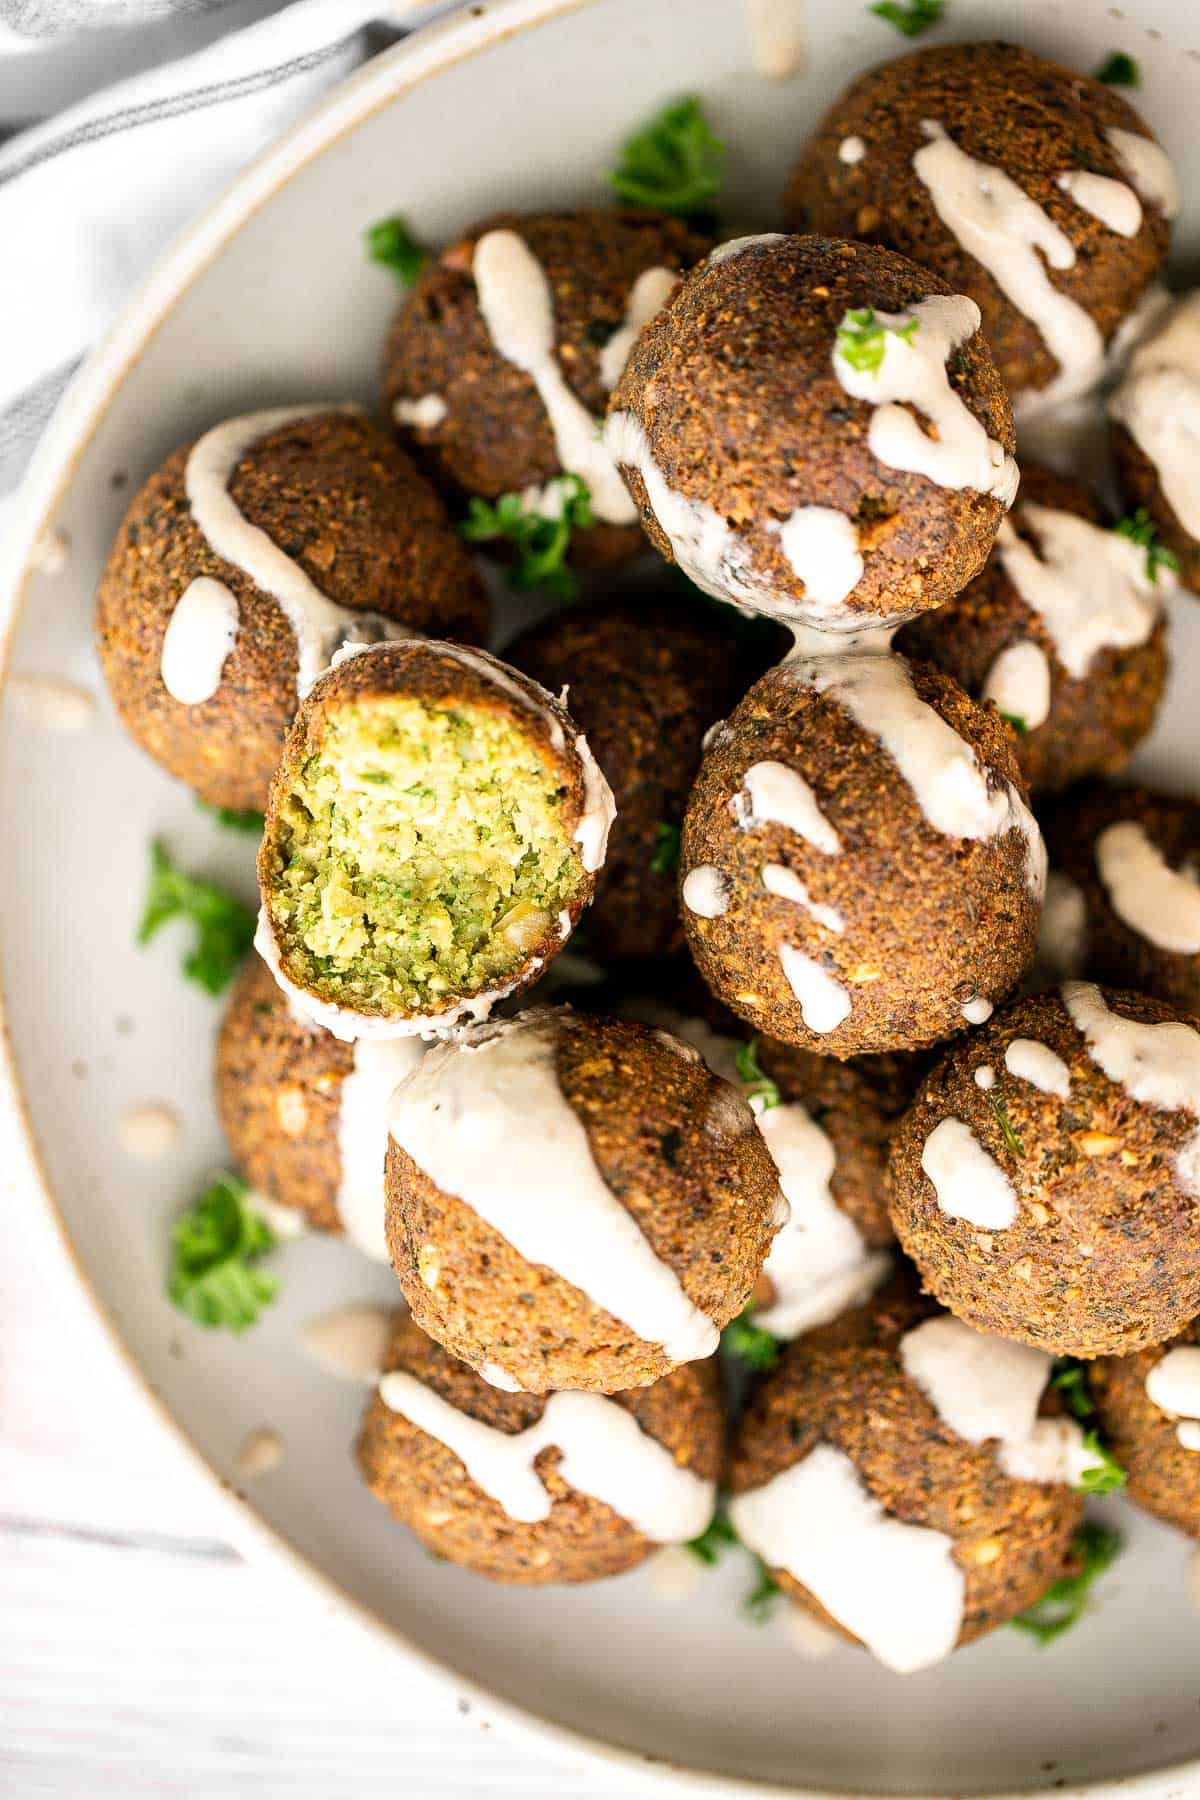 Homemade falafel are delicious, golden brown and crispy on the outside, fluffy tender and soft inside. Plus, they're vegan, loaded with plant-based protein. | aheadofthyme.com